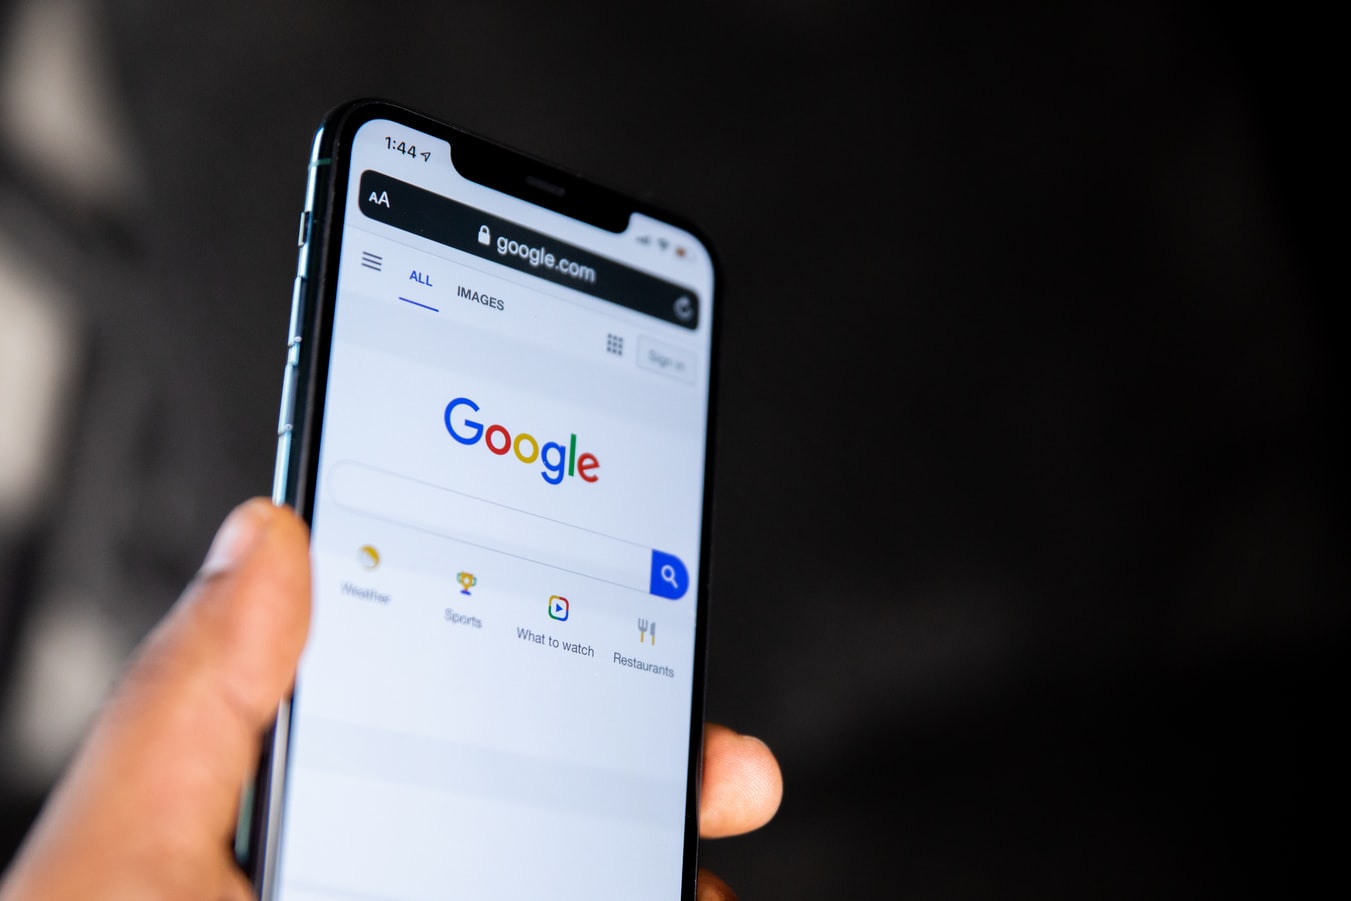 A mobile phone with Google loaded on the screen